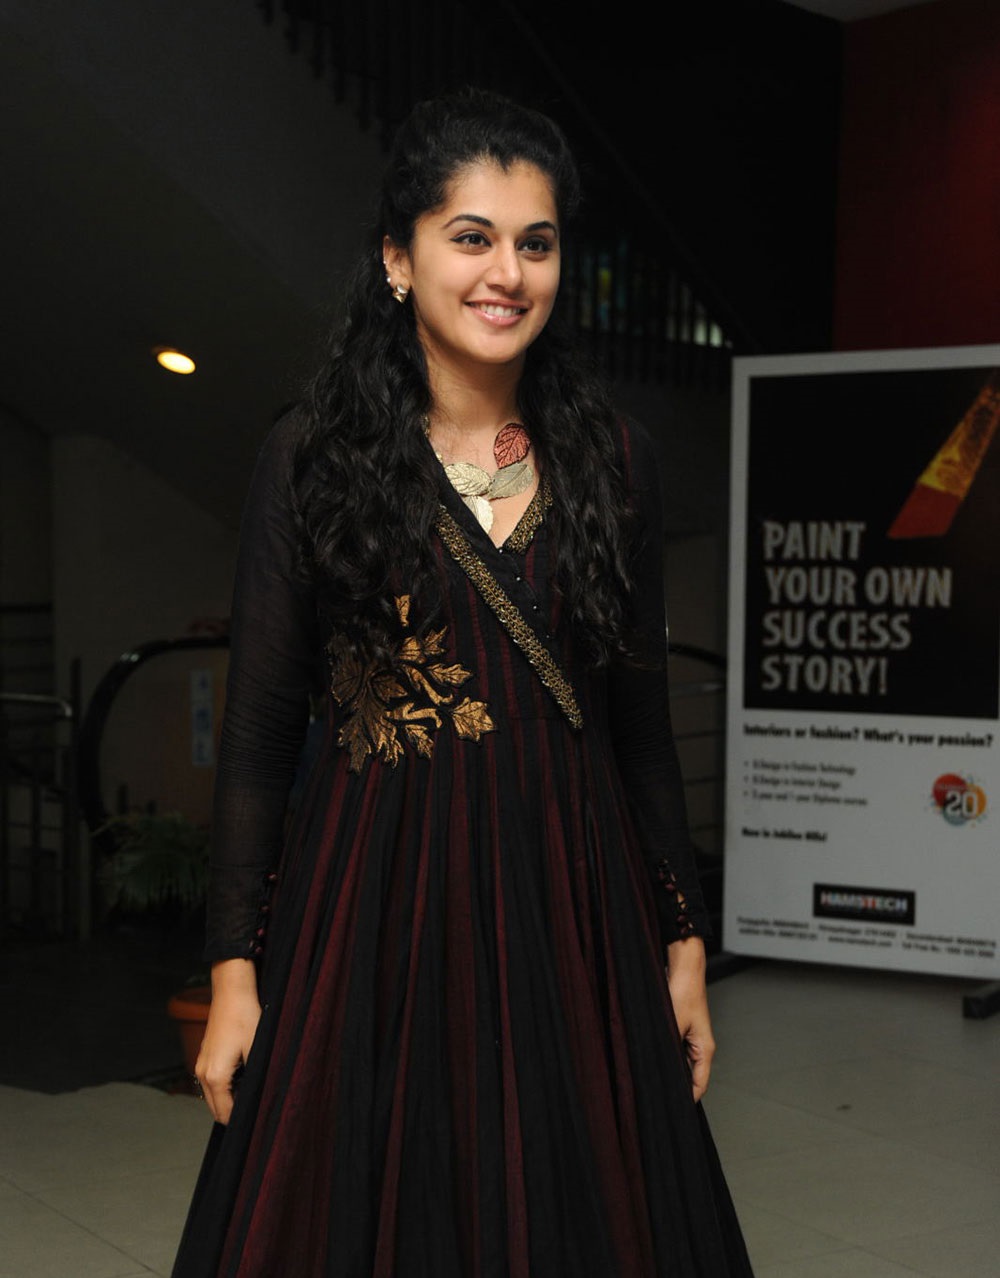 Glamorous Taapsee Pannu Smiling Photos In Maroon Dress